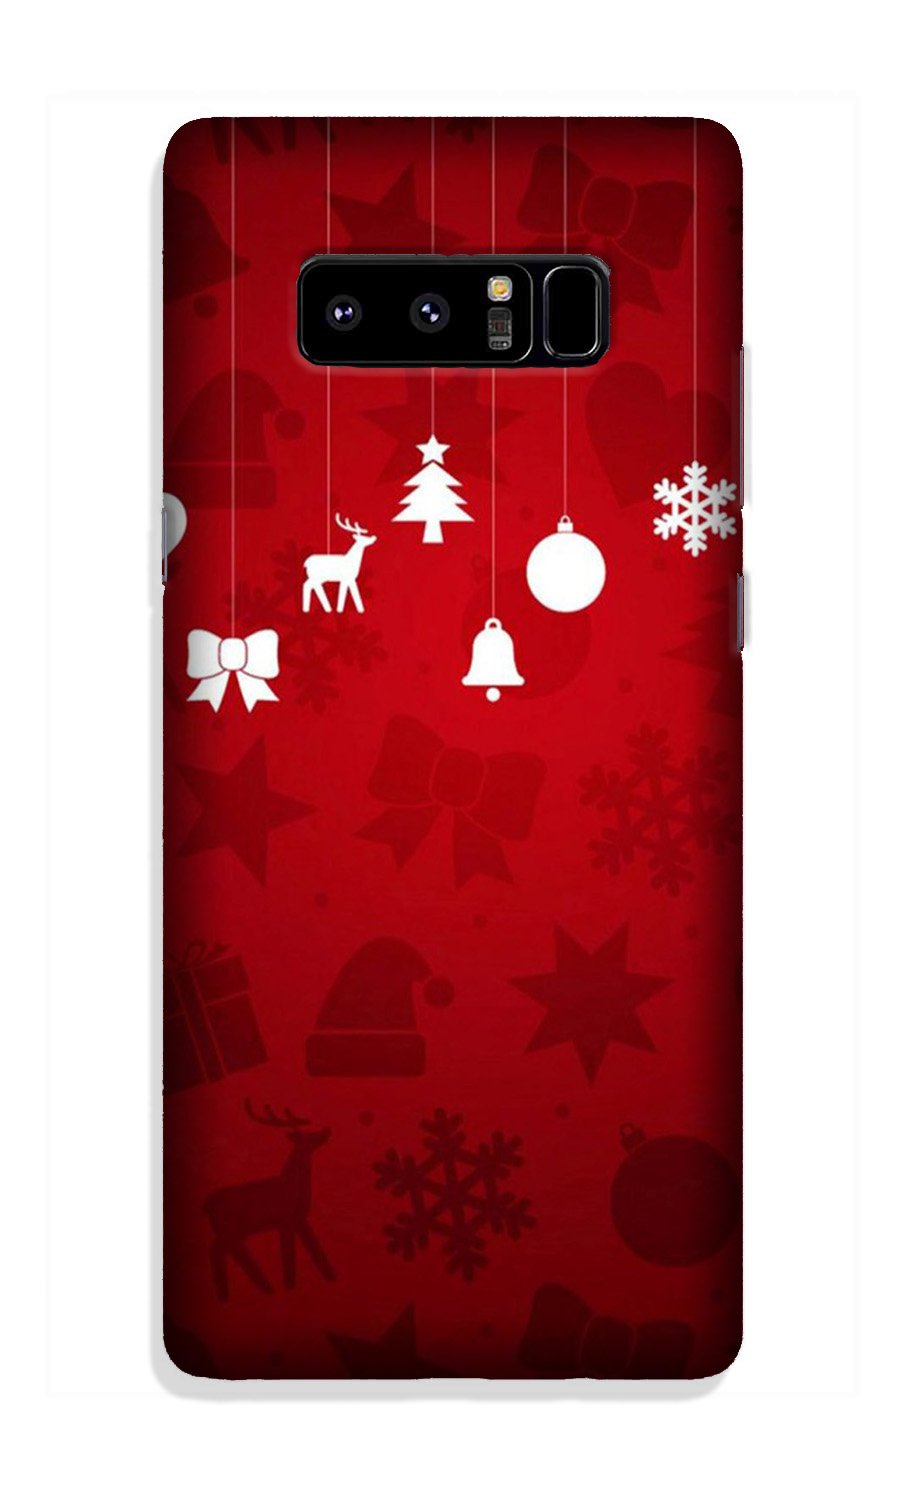 Christmas Case for Galaxy Note 8